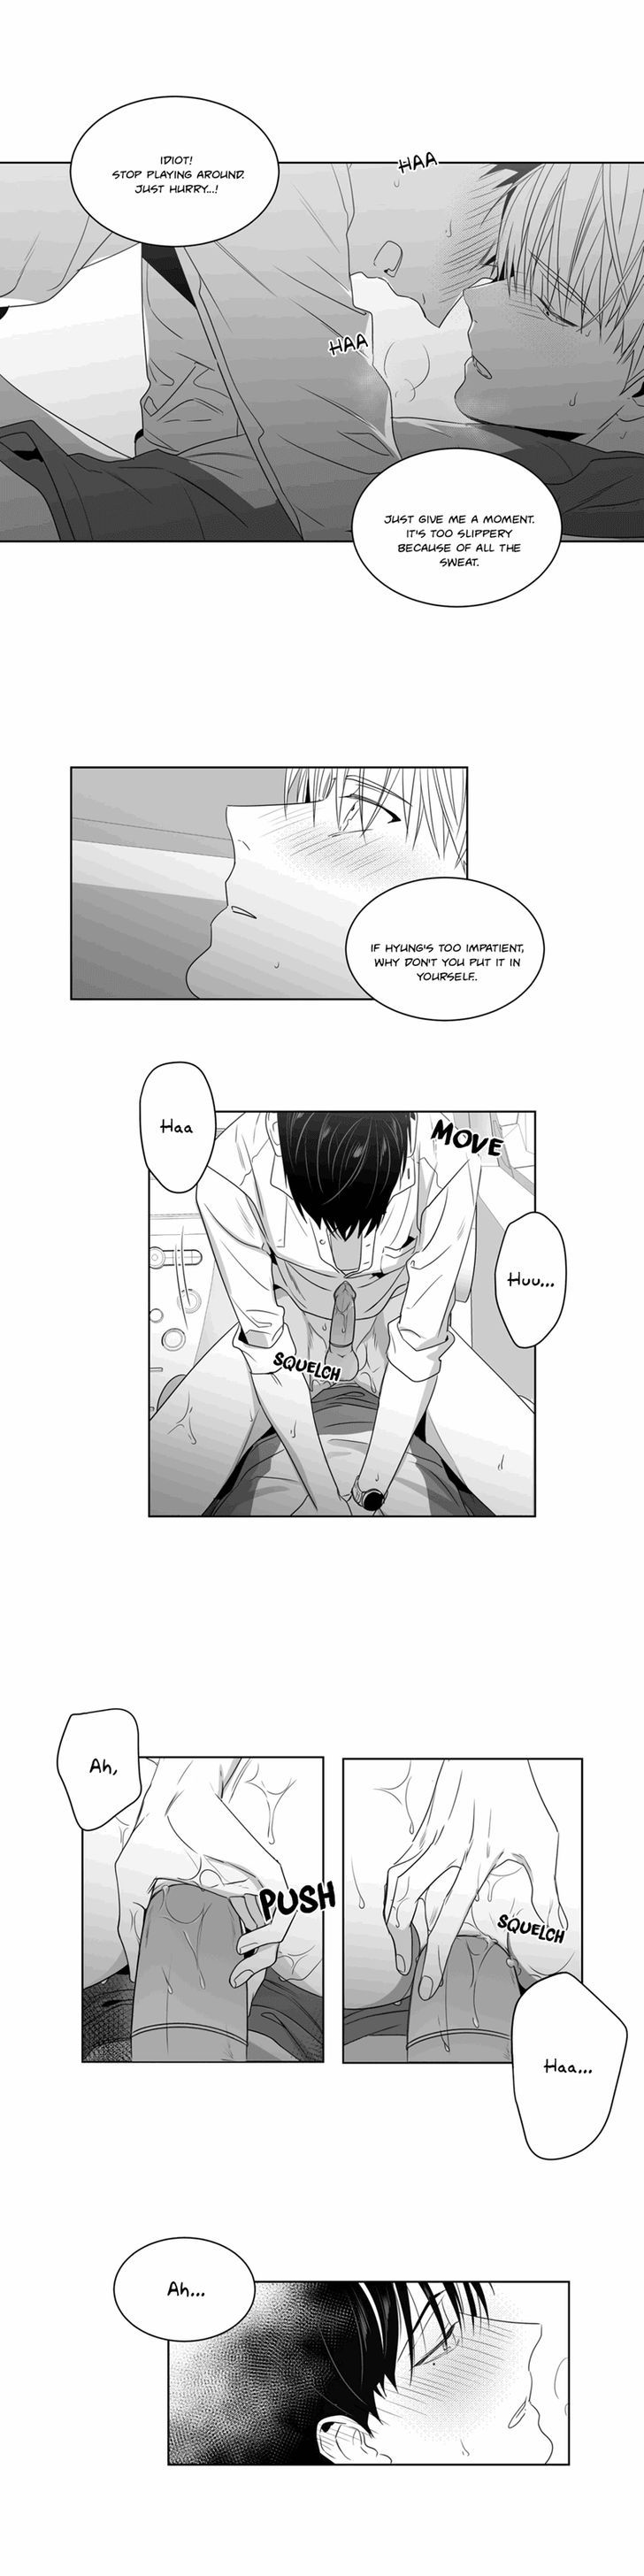 Lover Boy (Lezhin) Chapter 039 page 8